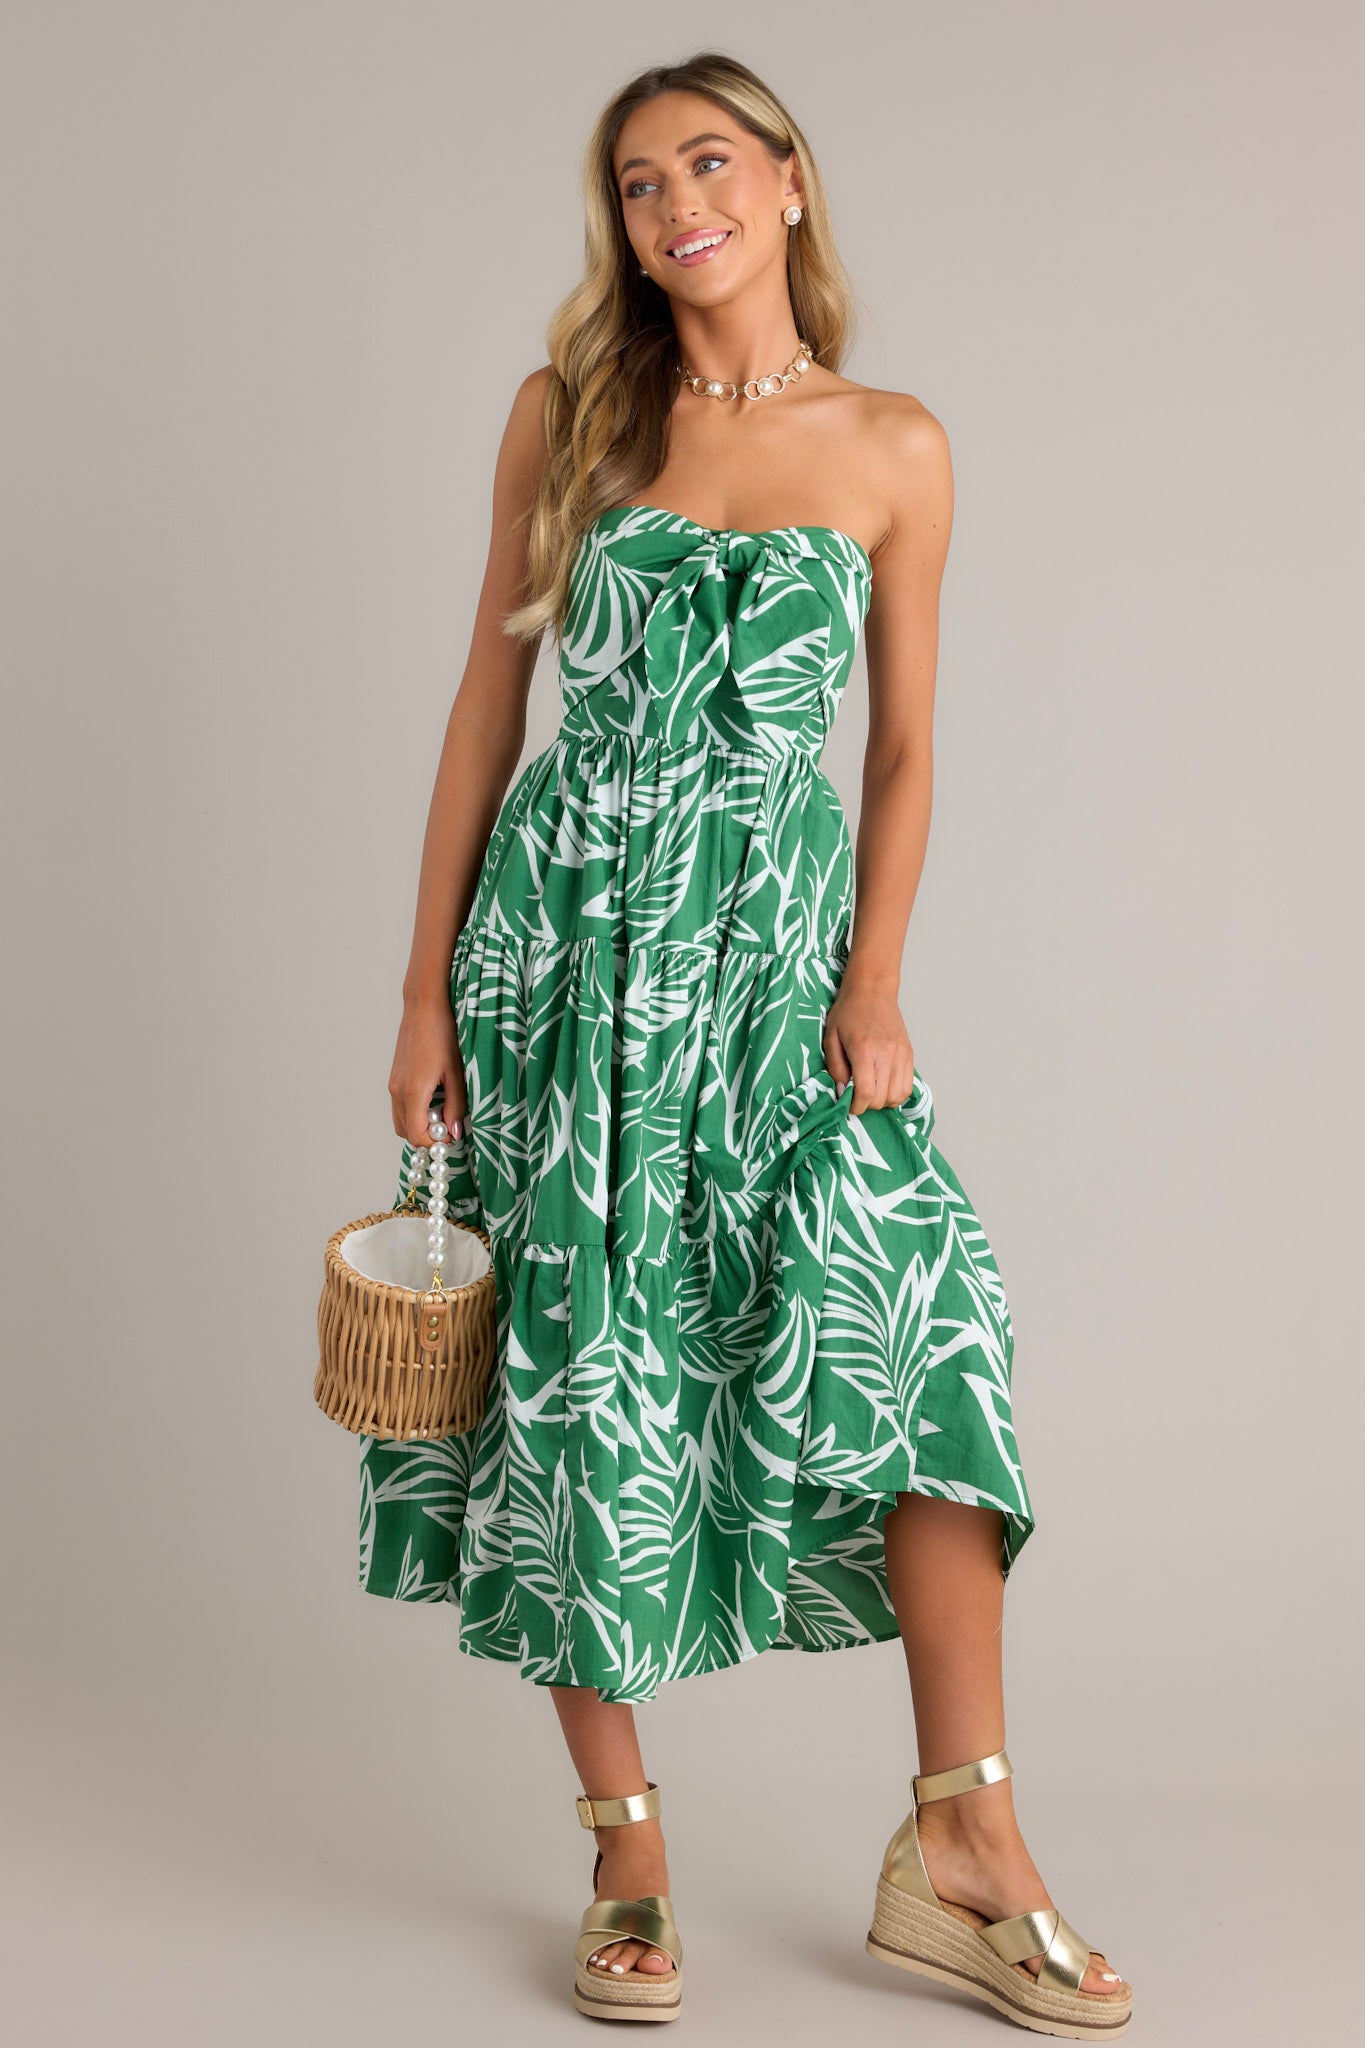 This green midi dress features a strapless neckline, boning in the bodice, a self-tie feature, a fully smocked insert in the back, and a tiered design.